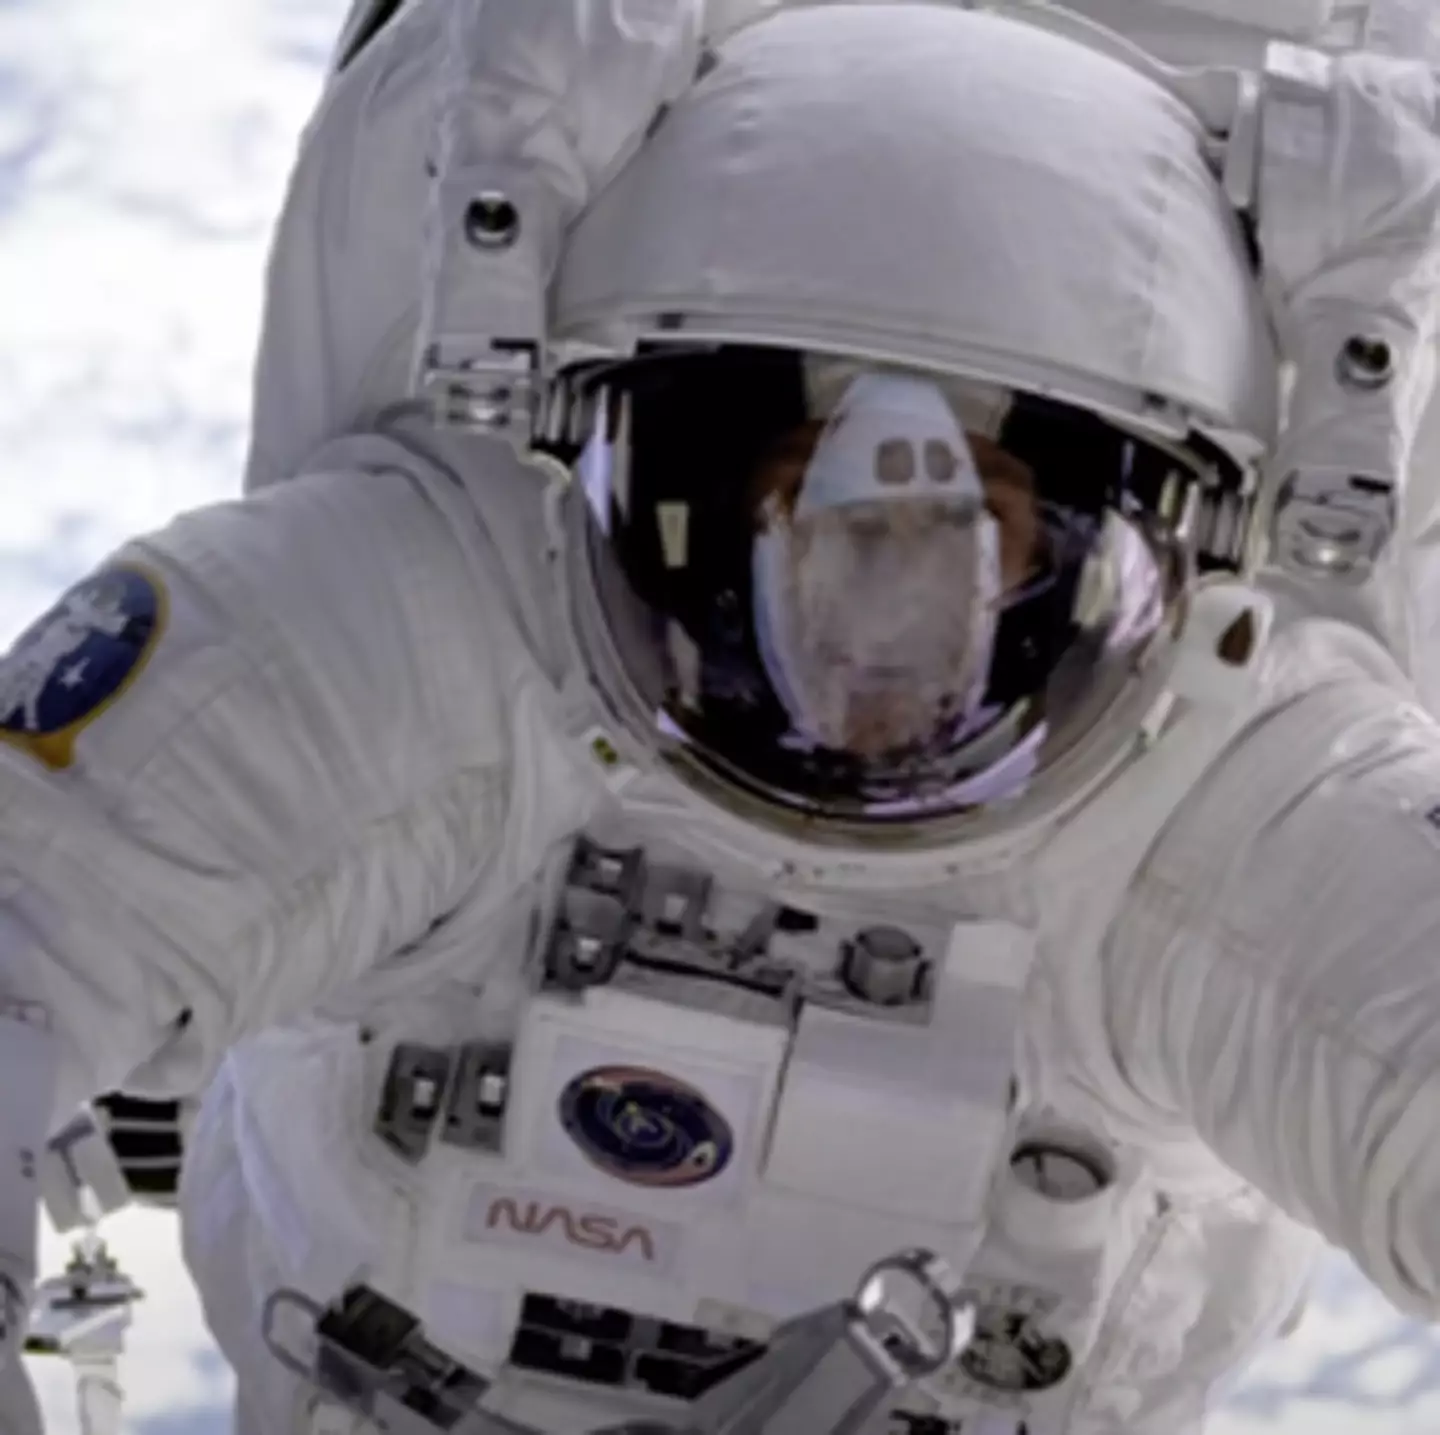 Terrifying simulation shows what would happen if an astronaut floated away into space